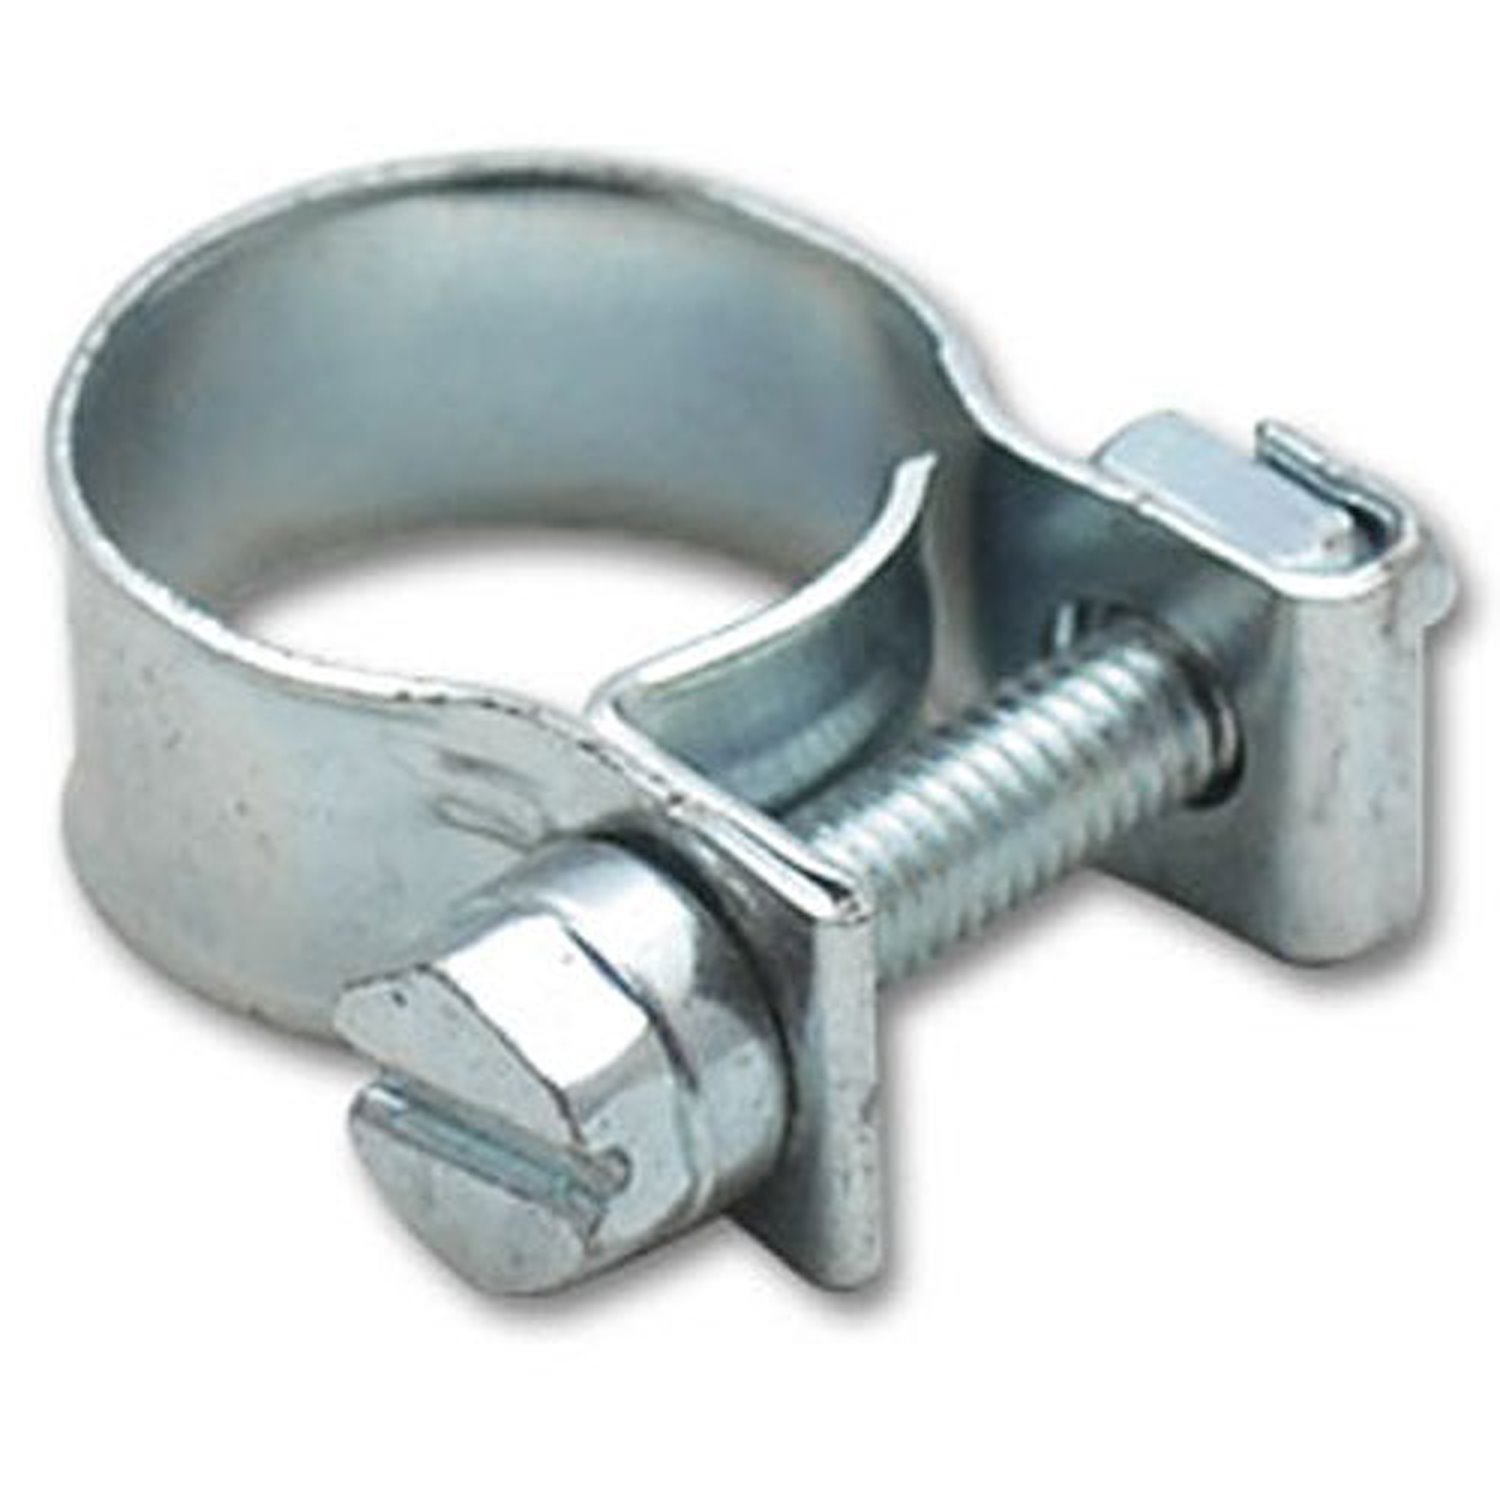 Fuel Injector Style Mini Hose Clamps 11mm - 13mm